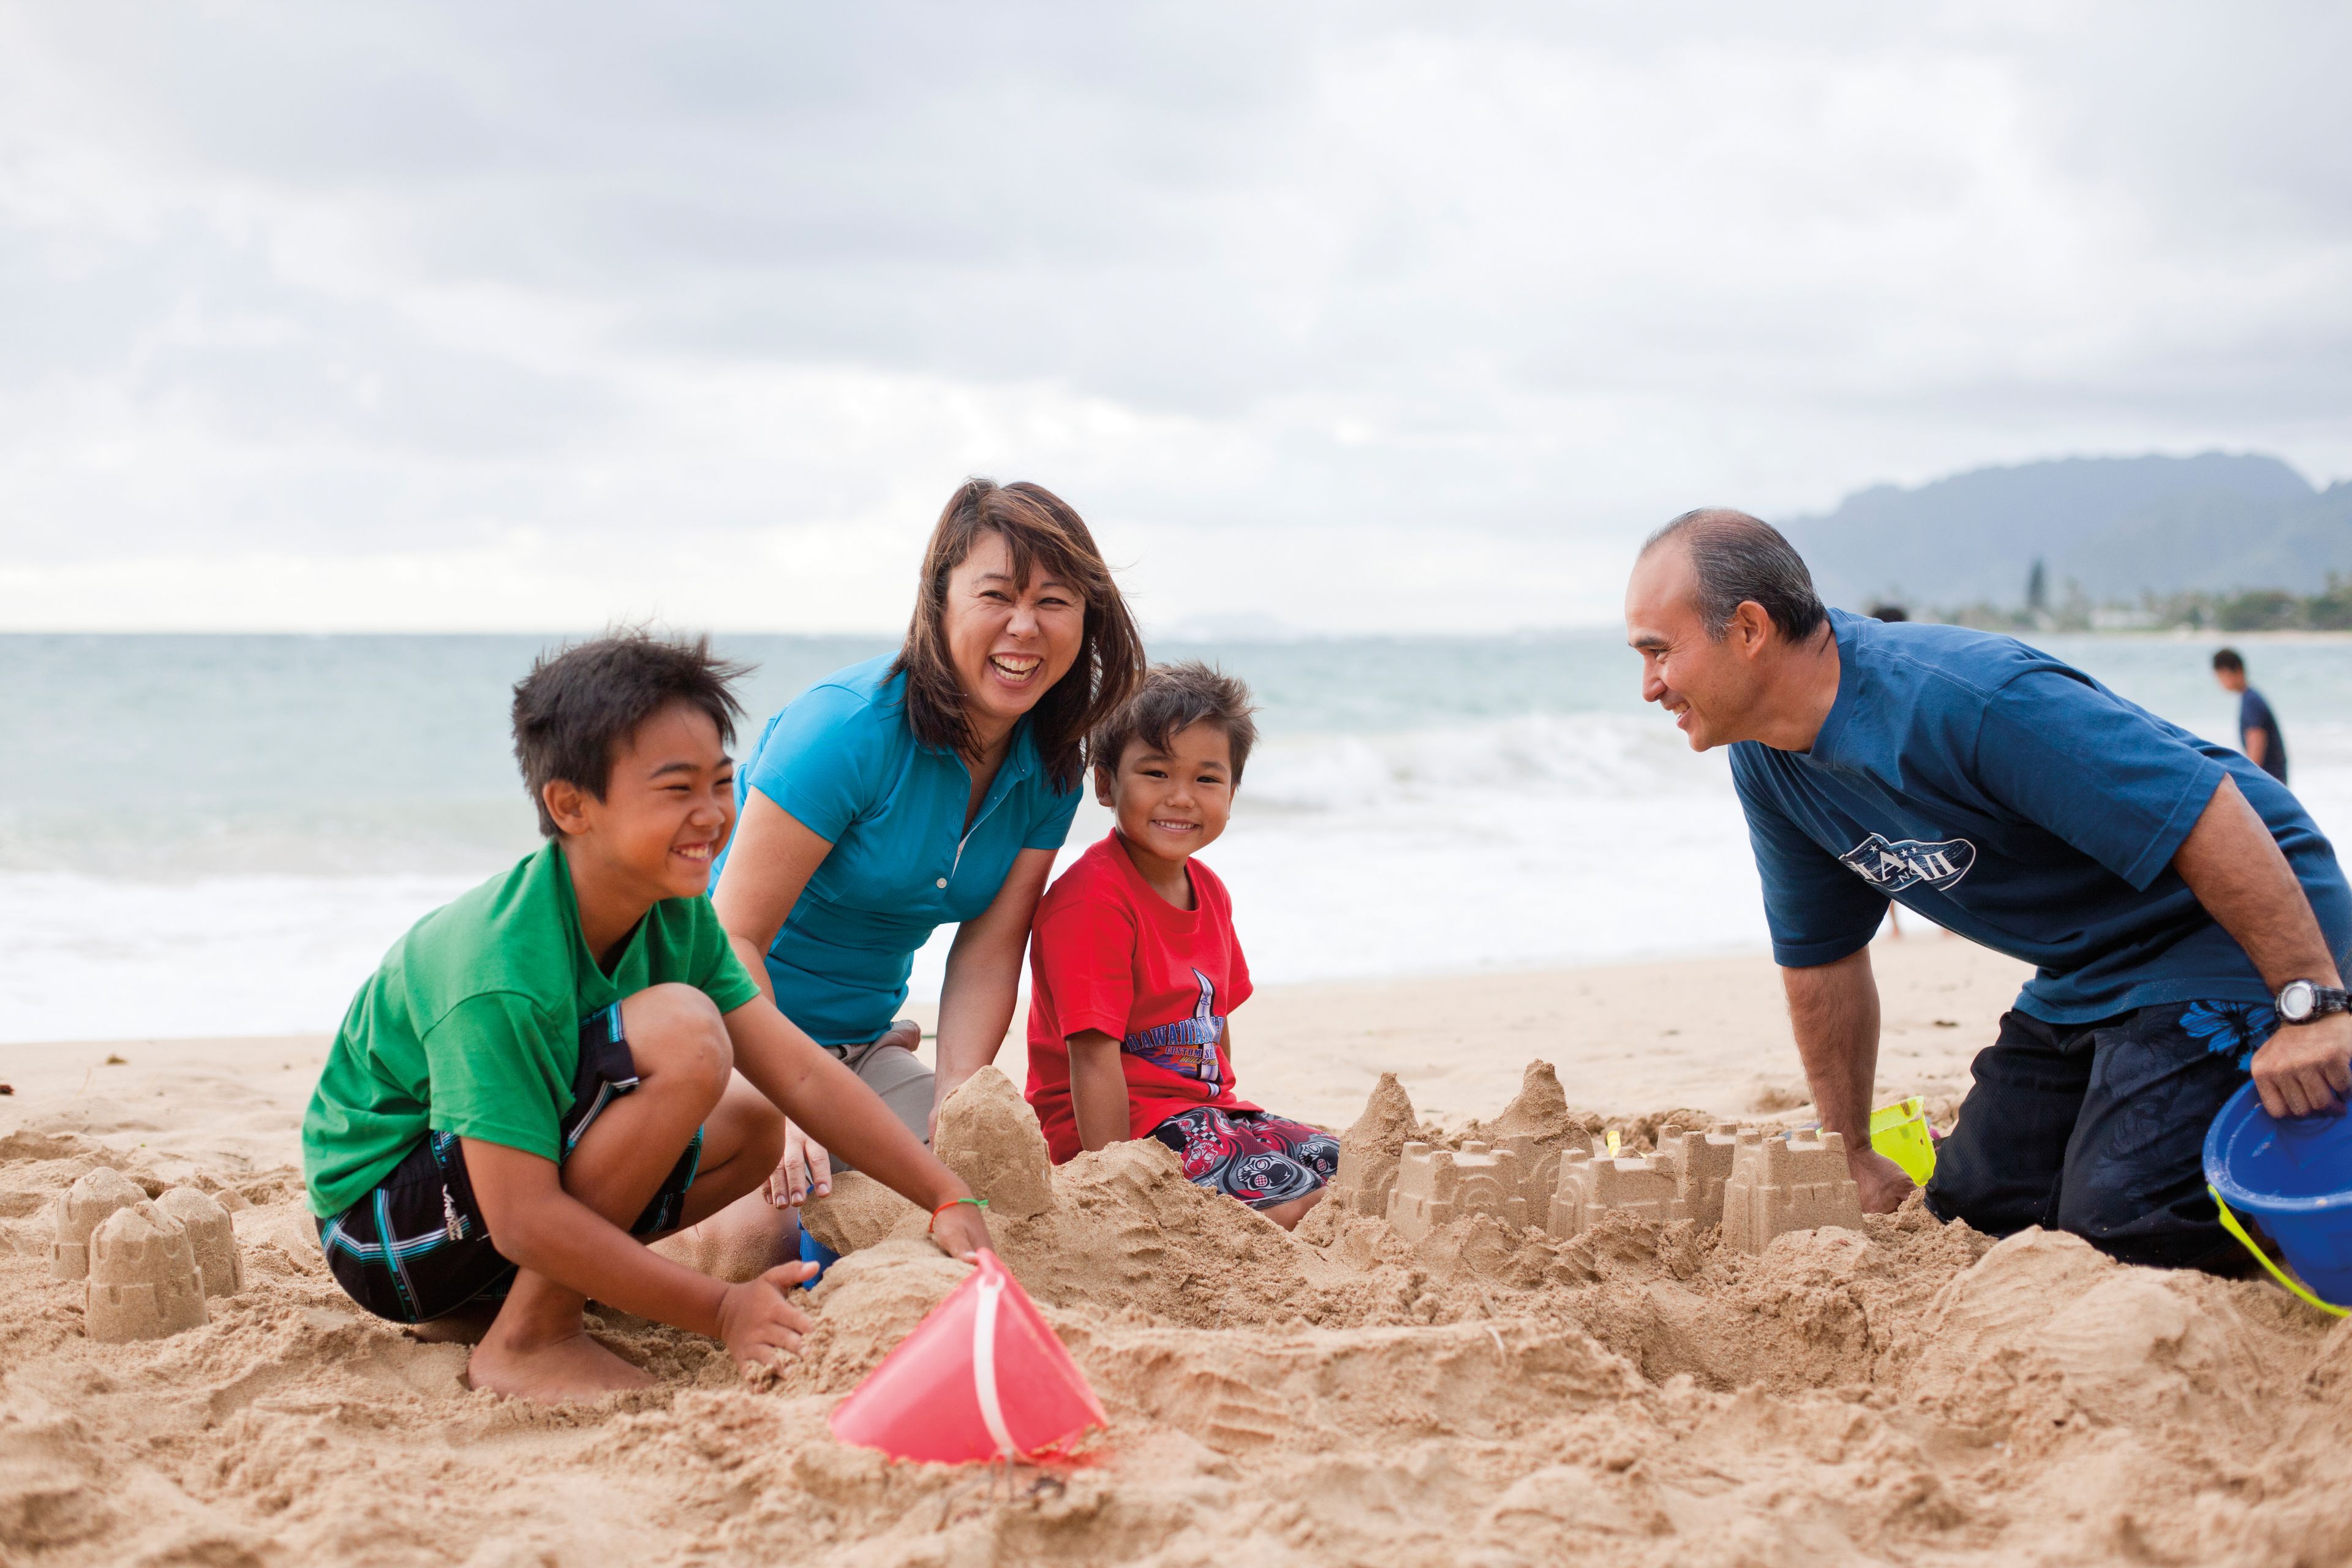 A family builds a sand castle together.